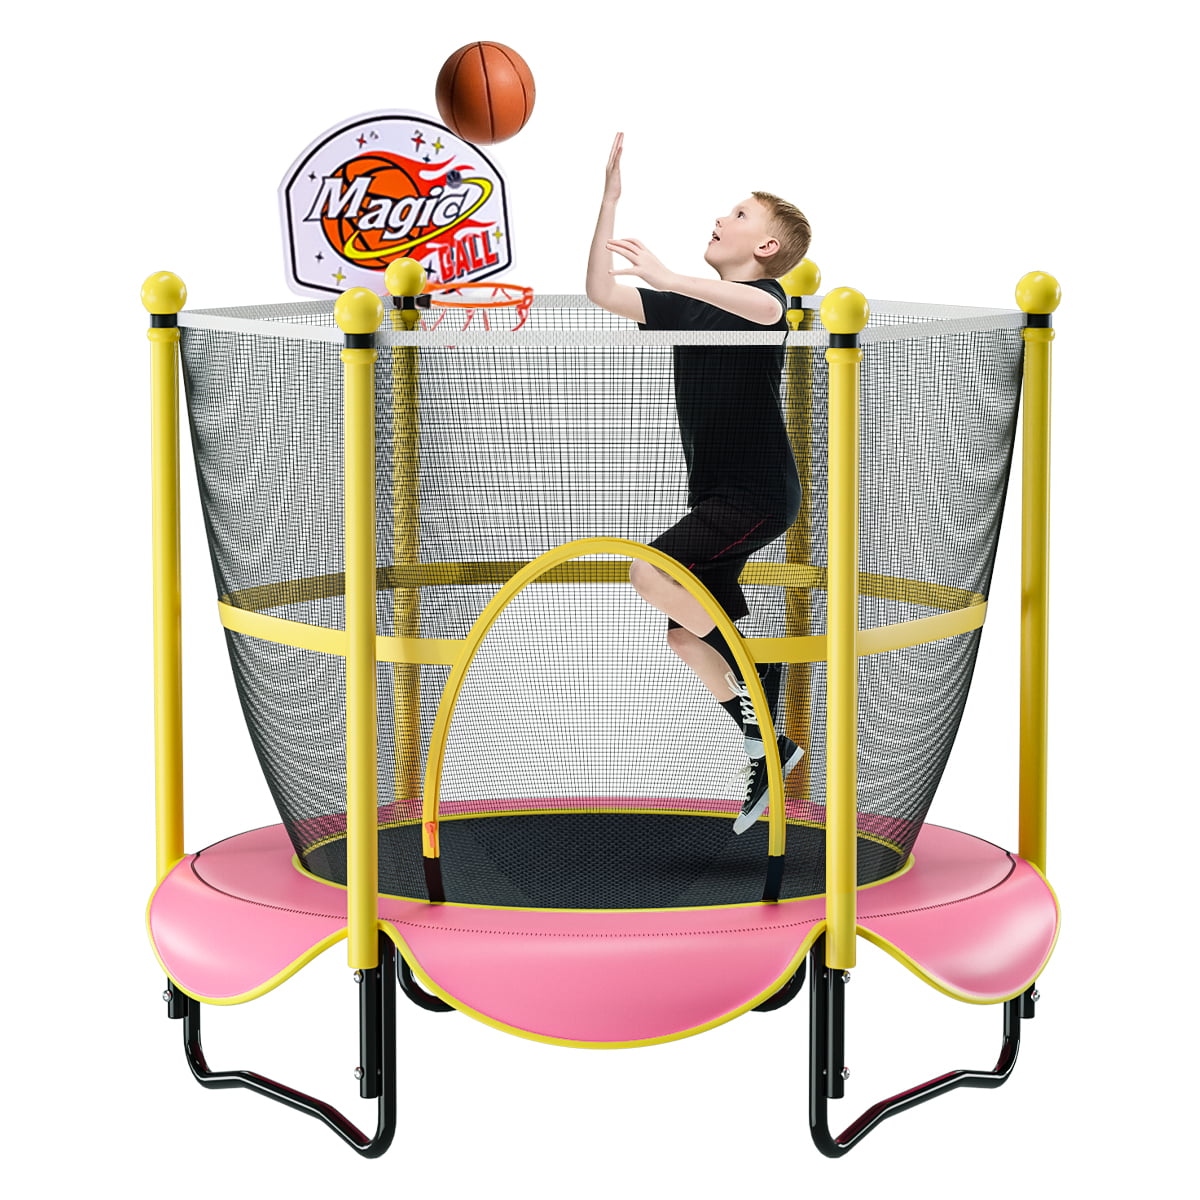 Lovely Snail 5FT Trampoline for Kids with Safety Enclosure Net Basketball Hoop Mini Trampoline 60 for Outdoor Indoor Family Backyard School Entertainment Age 3-10 